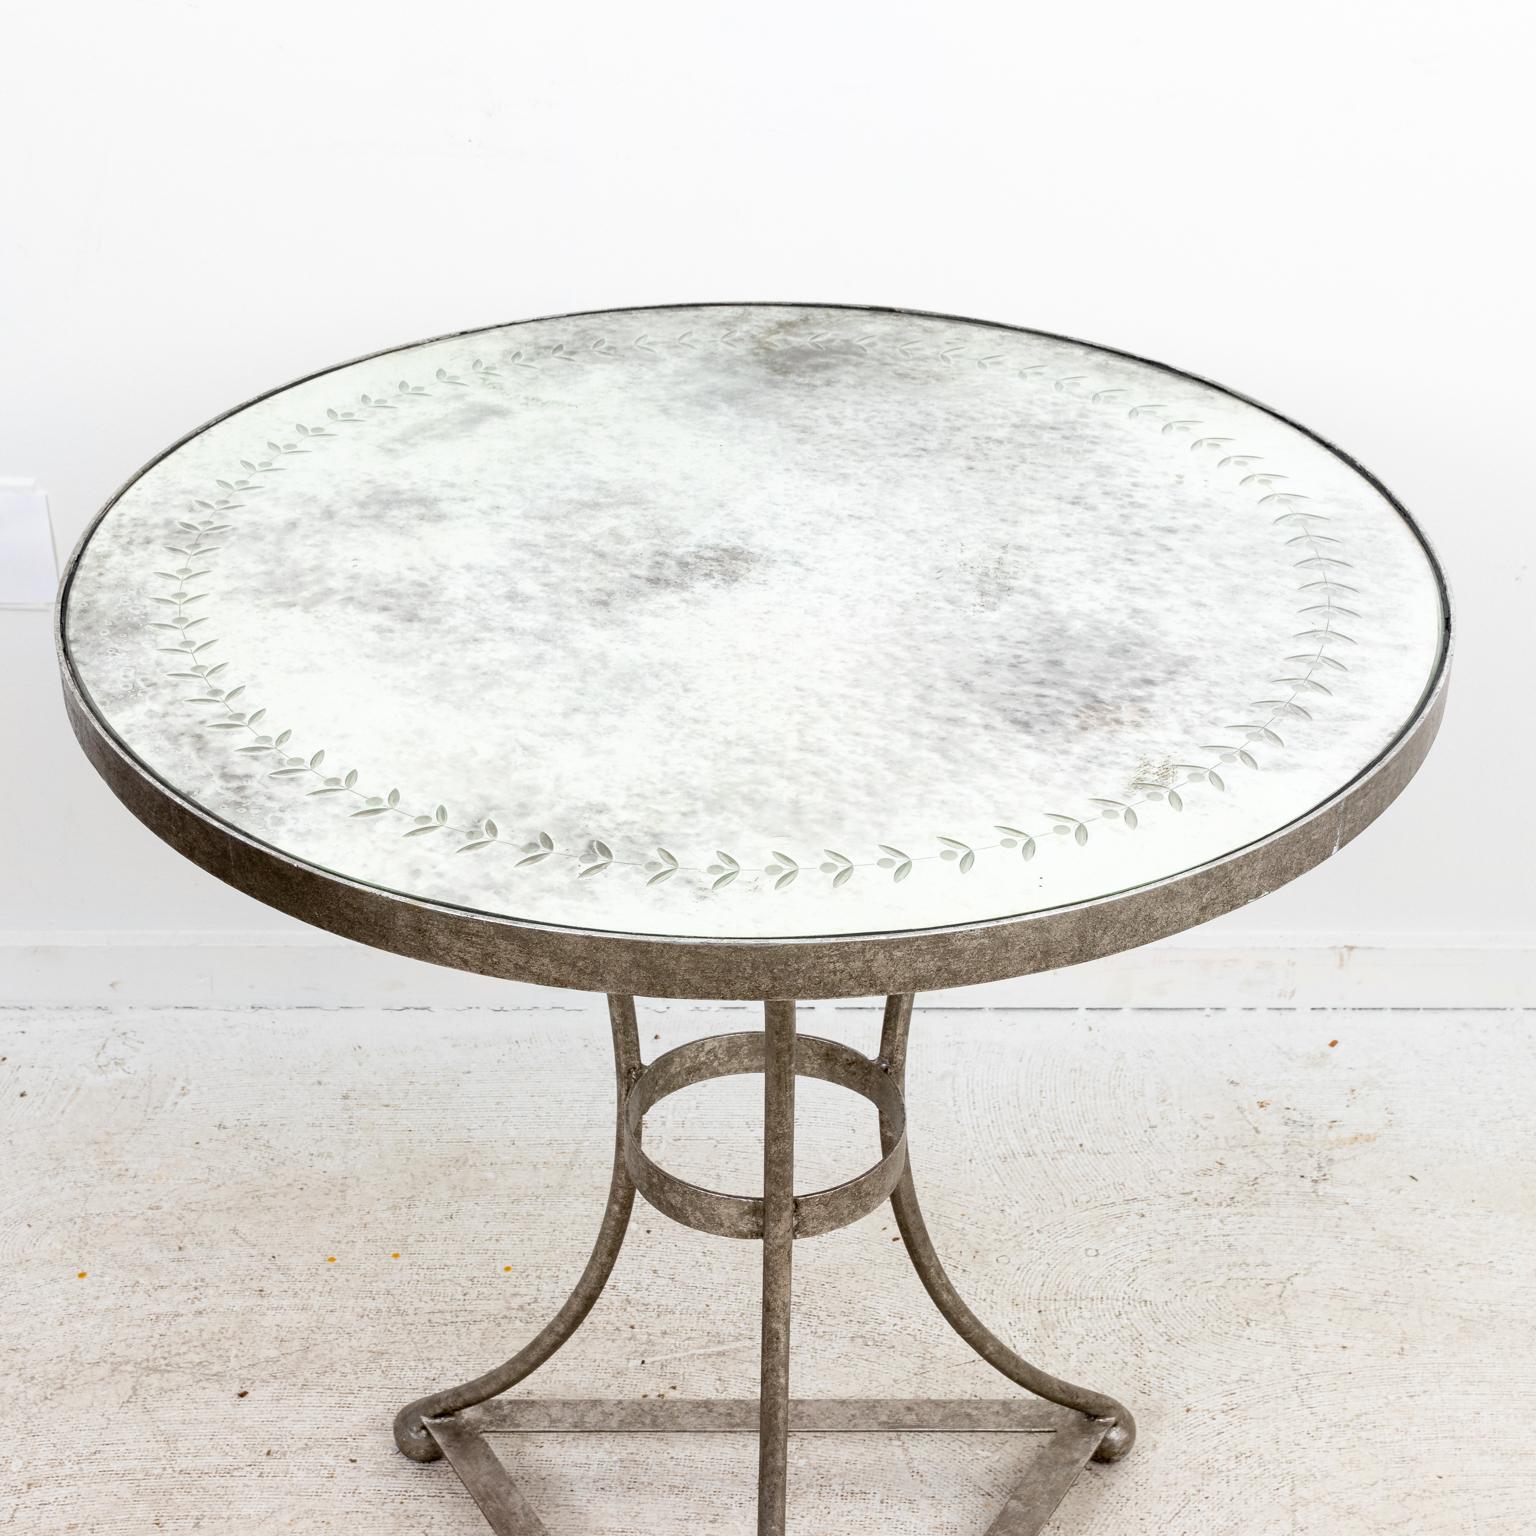 Round side table with Mercury mirror tabletop and silver gilt base. The tabletop is also detailed with laurel trim. Please note of wear consistent with age including patina and oxidation.